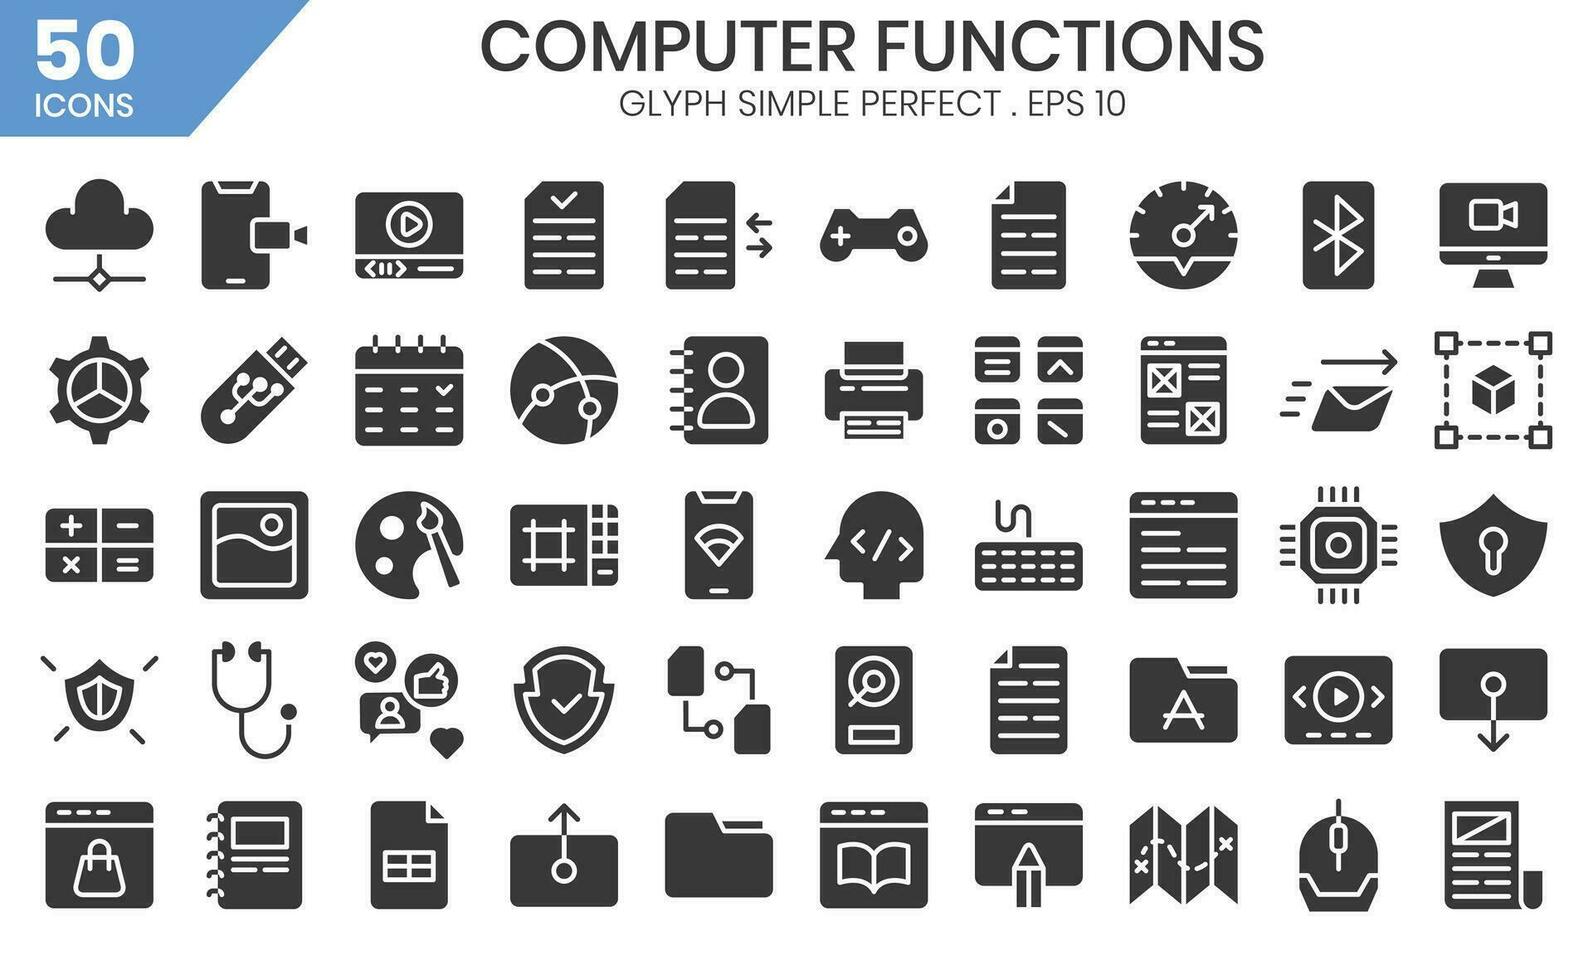 computer tools glyph icon set.The collection includes business and development, programming, web design, app design, and more. vector